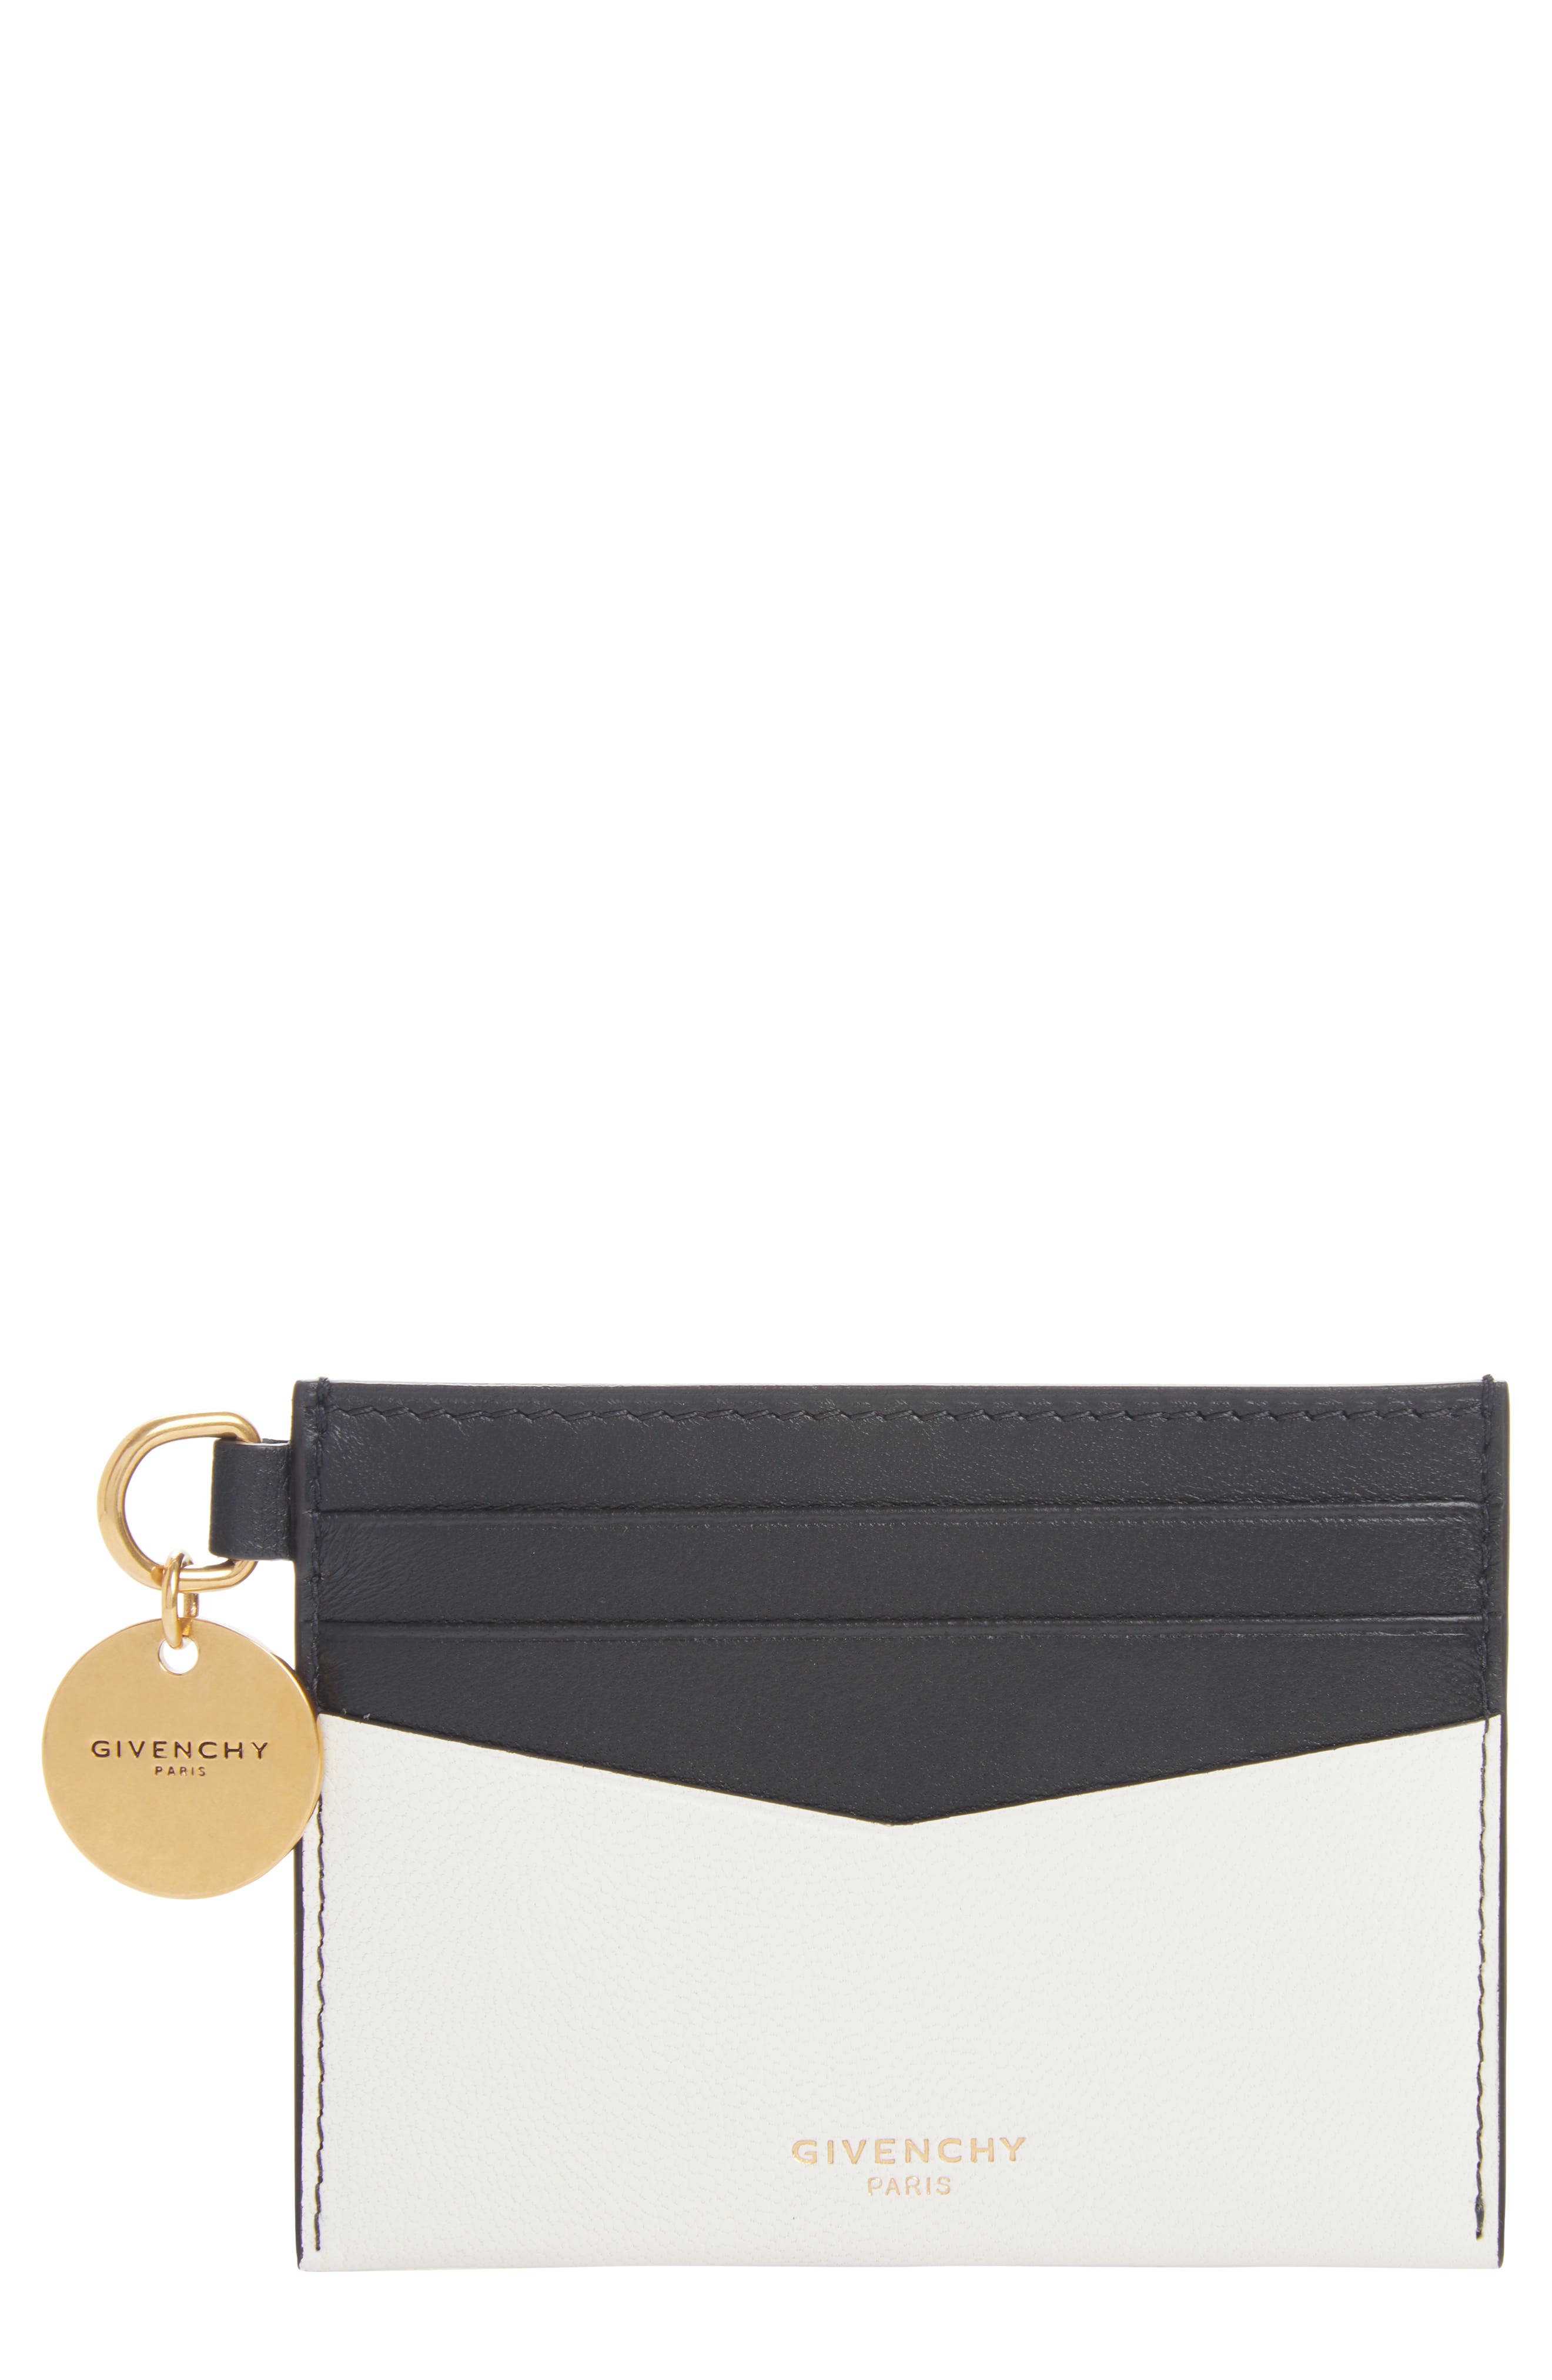 Givenchy Wallets \u0026 Card Cases for Women 